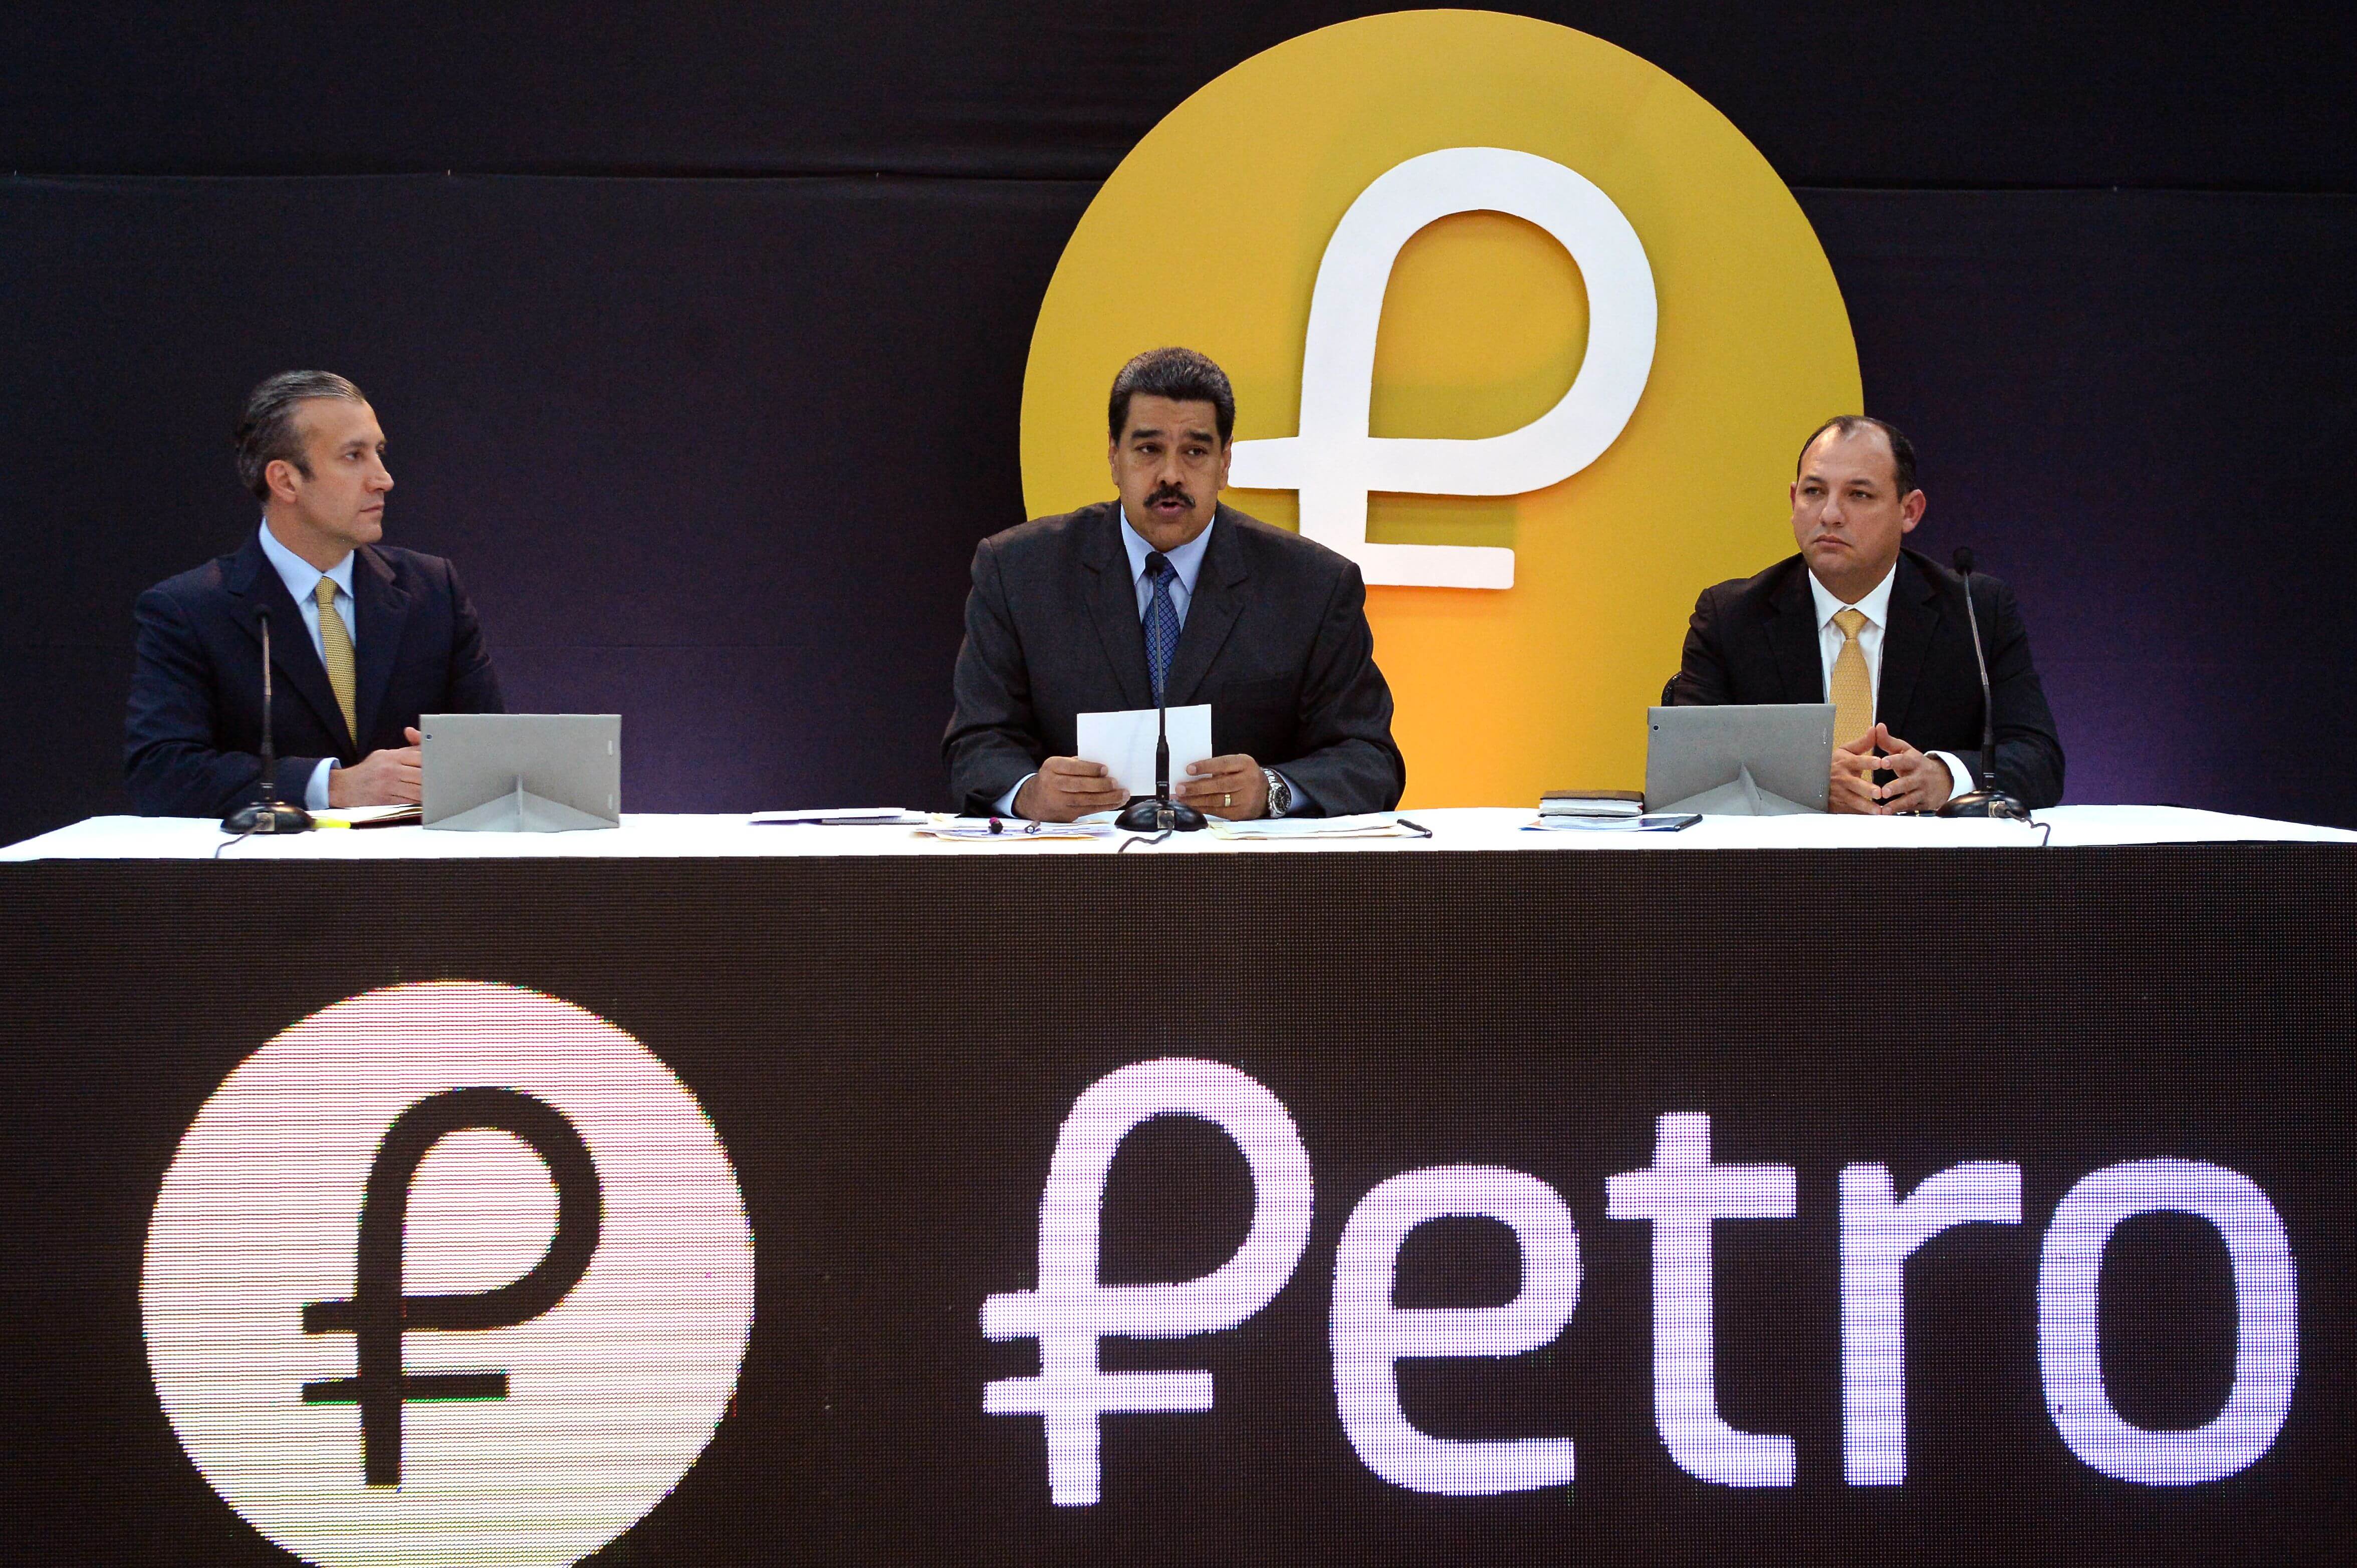 President Maduro talking about Petro currency